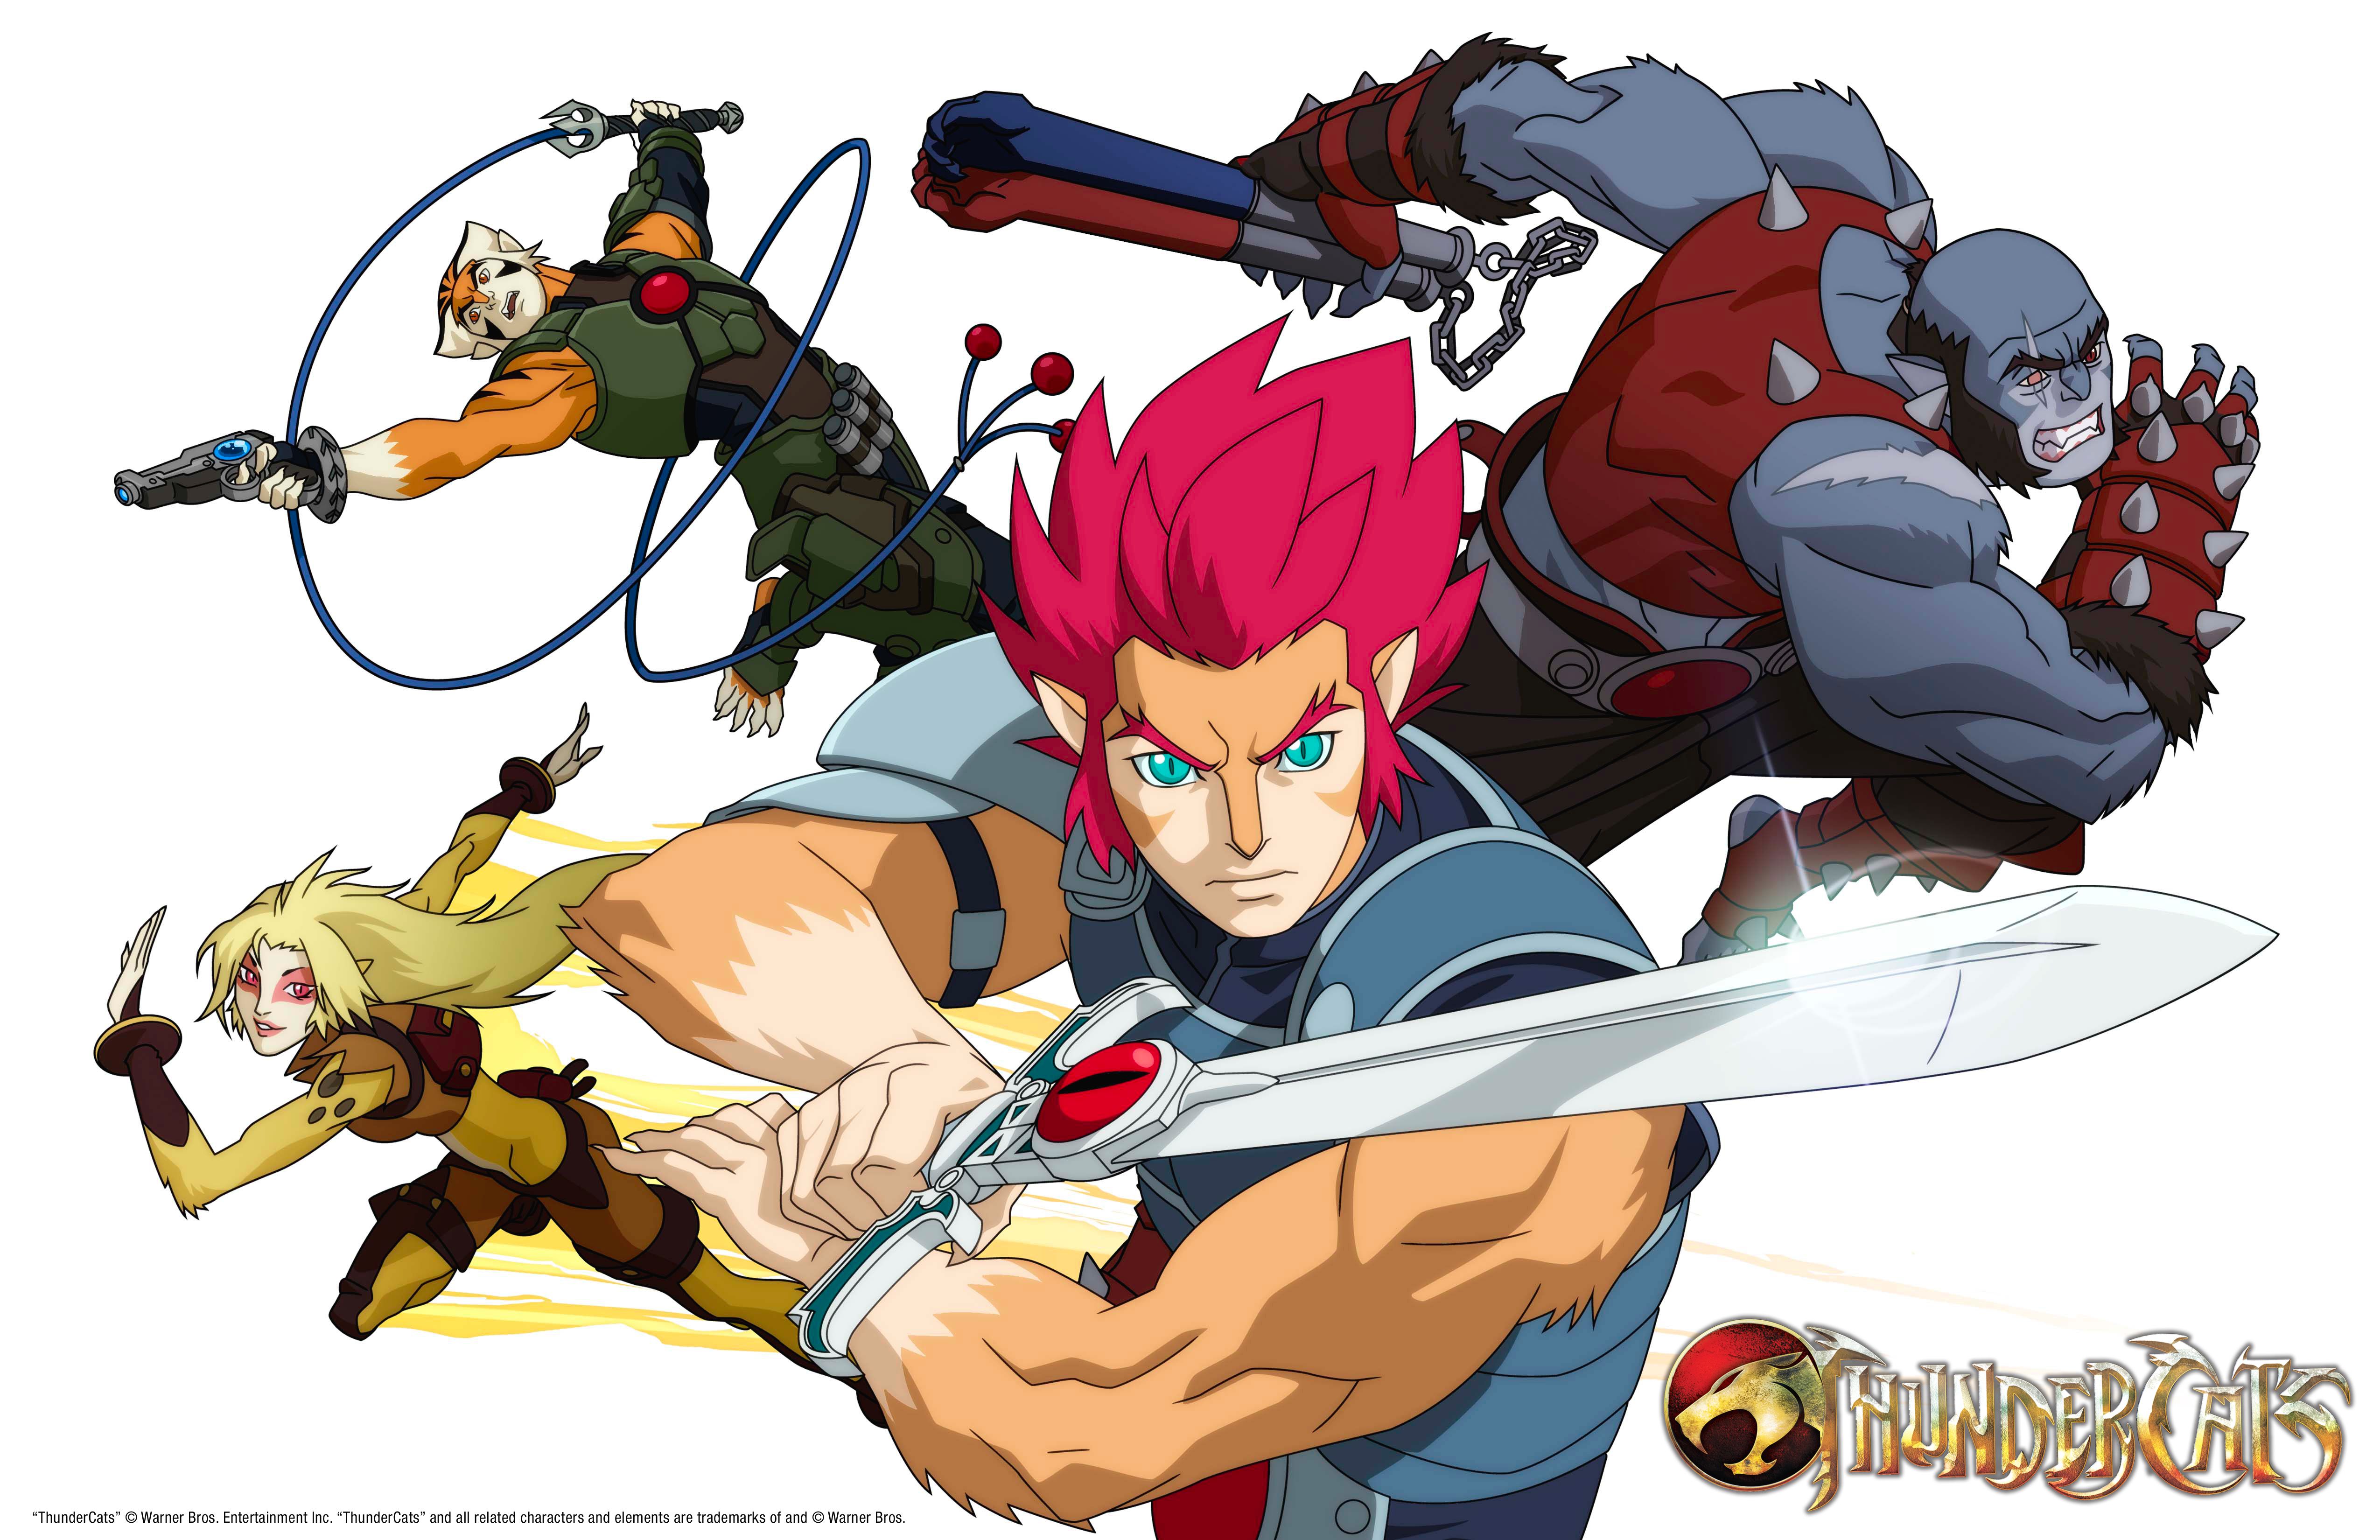 New THUNDERCATS Series Premieres July 29th on Cartoon Network and Will